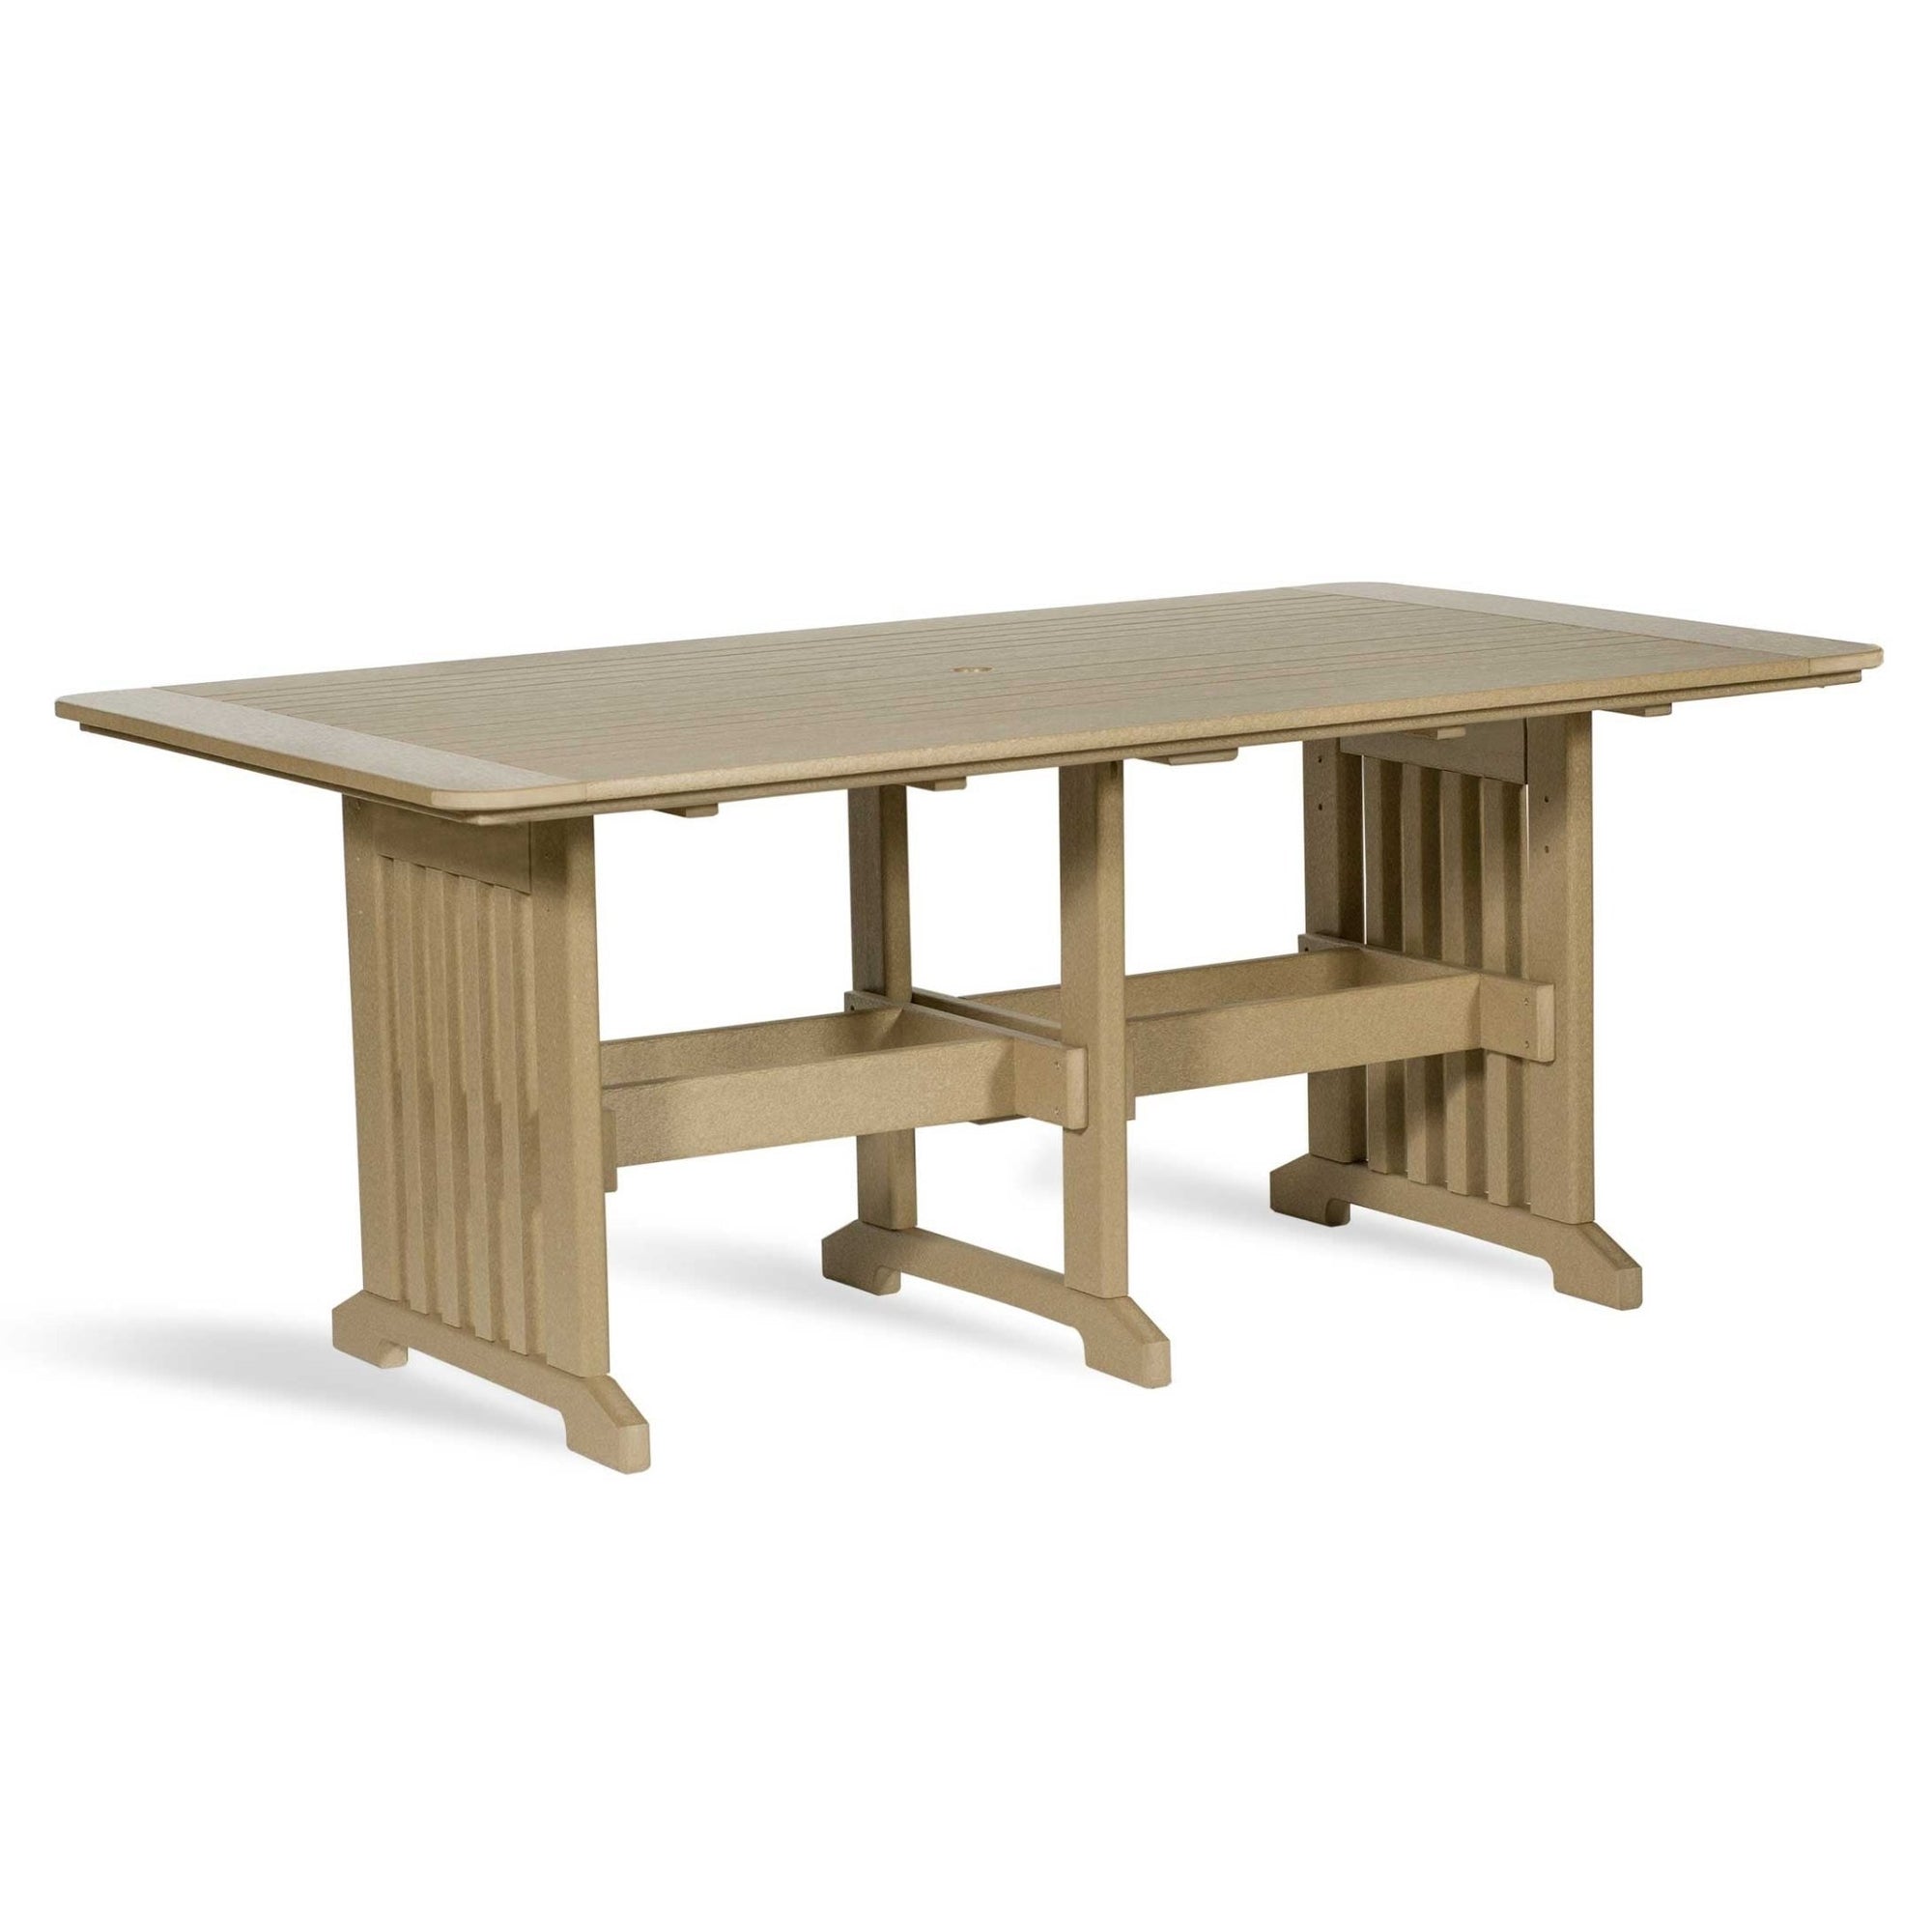 English Garden Amish 72" Poly Dining Table Leisure Lawns